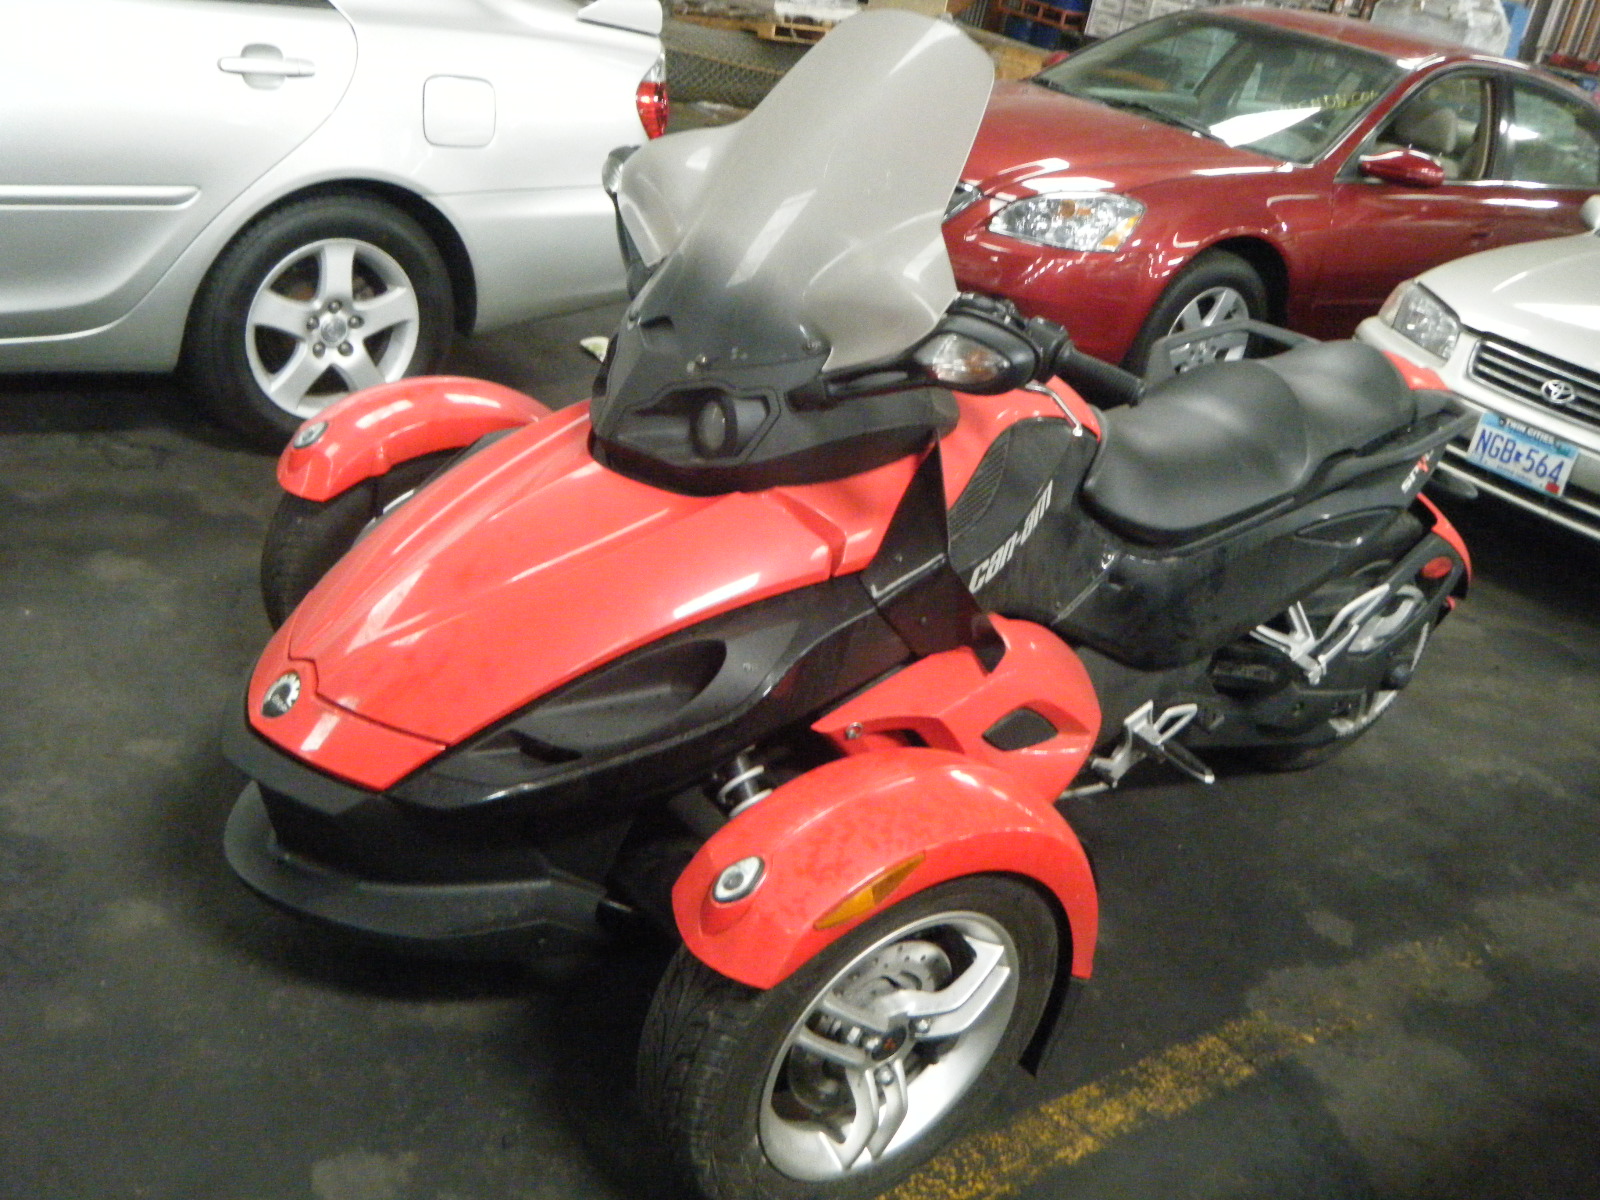 Used Car - 2009 Can-Am Spyder for Sale in Brooklyn, NY